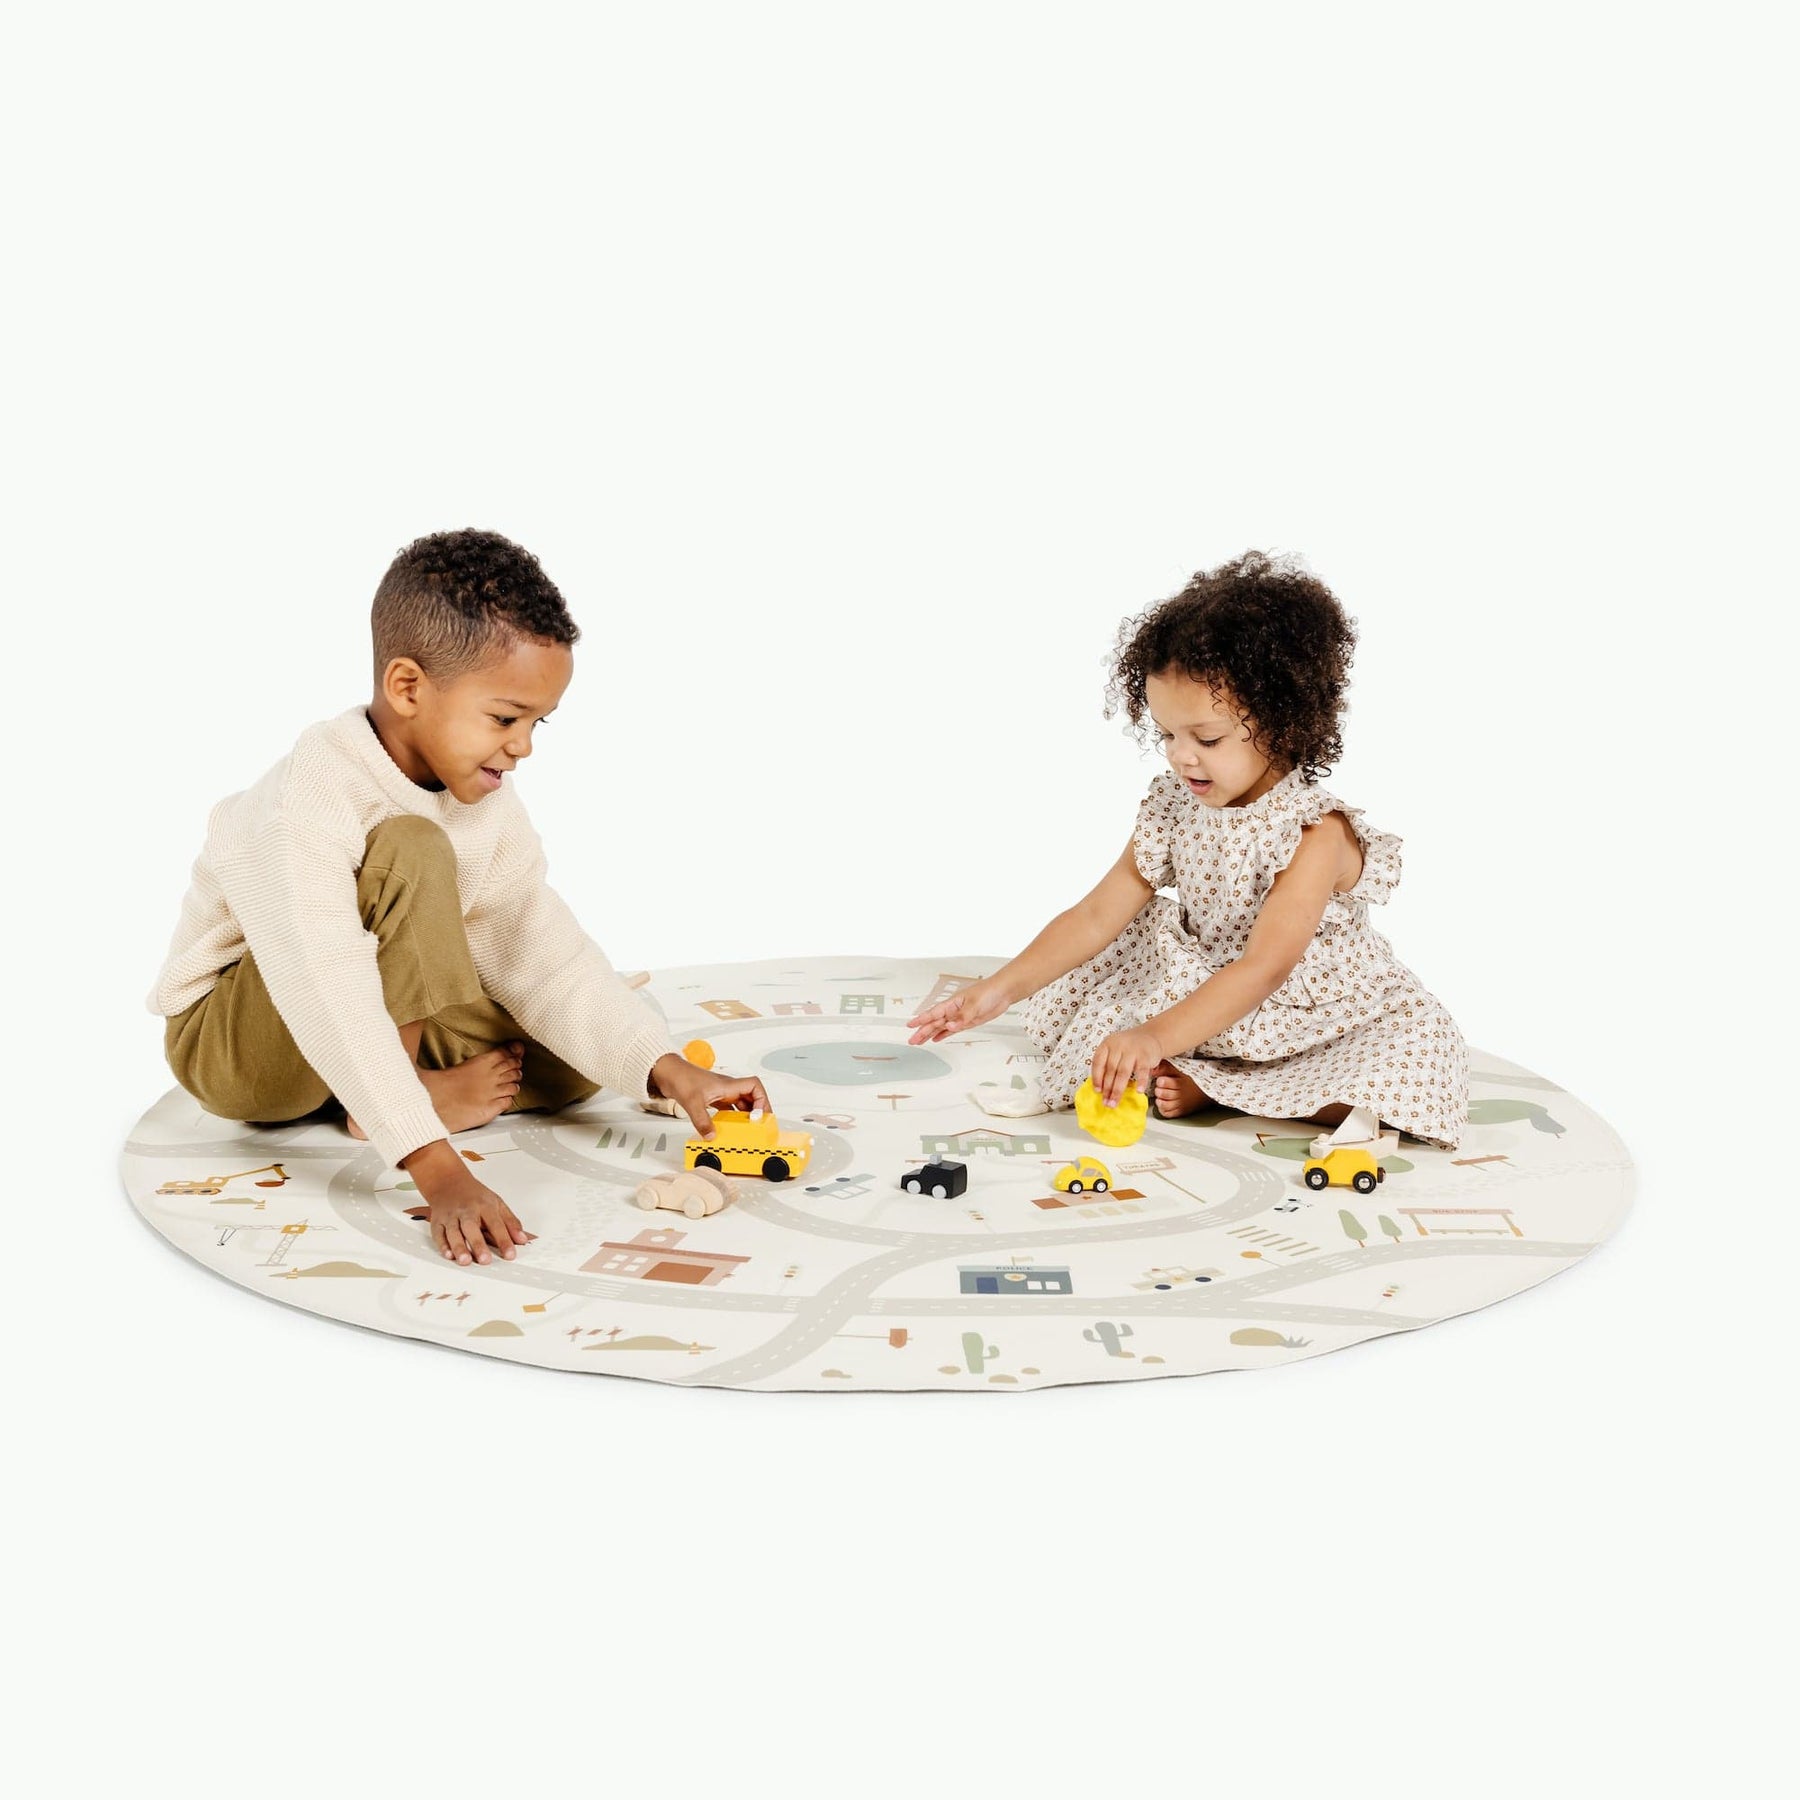 Gathre Large Play Mat in Commons Gathre Large Play Mat in Commons